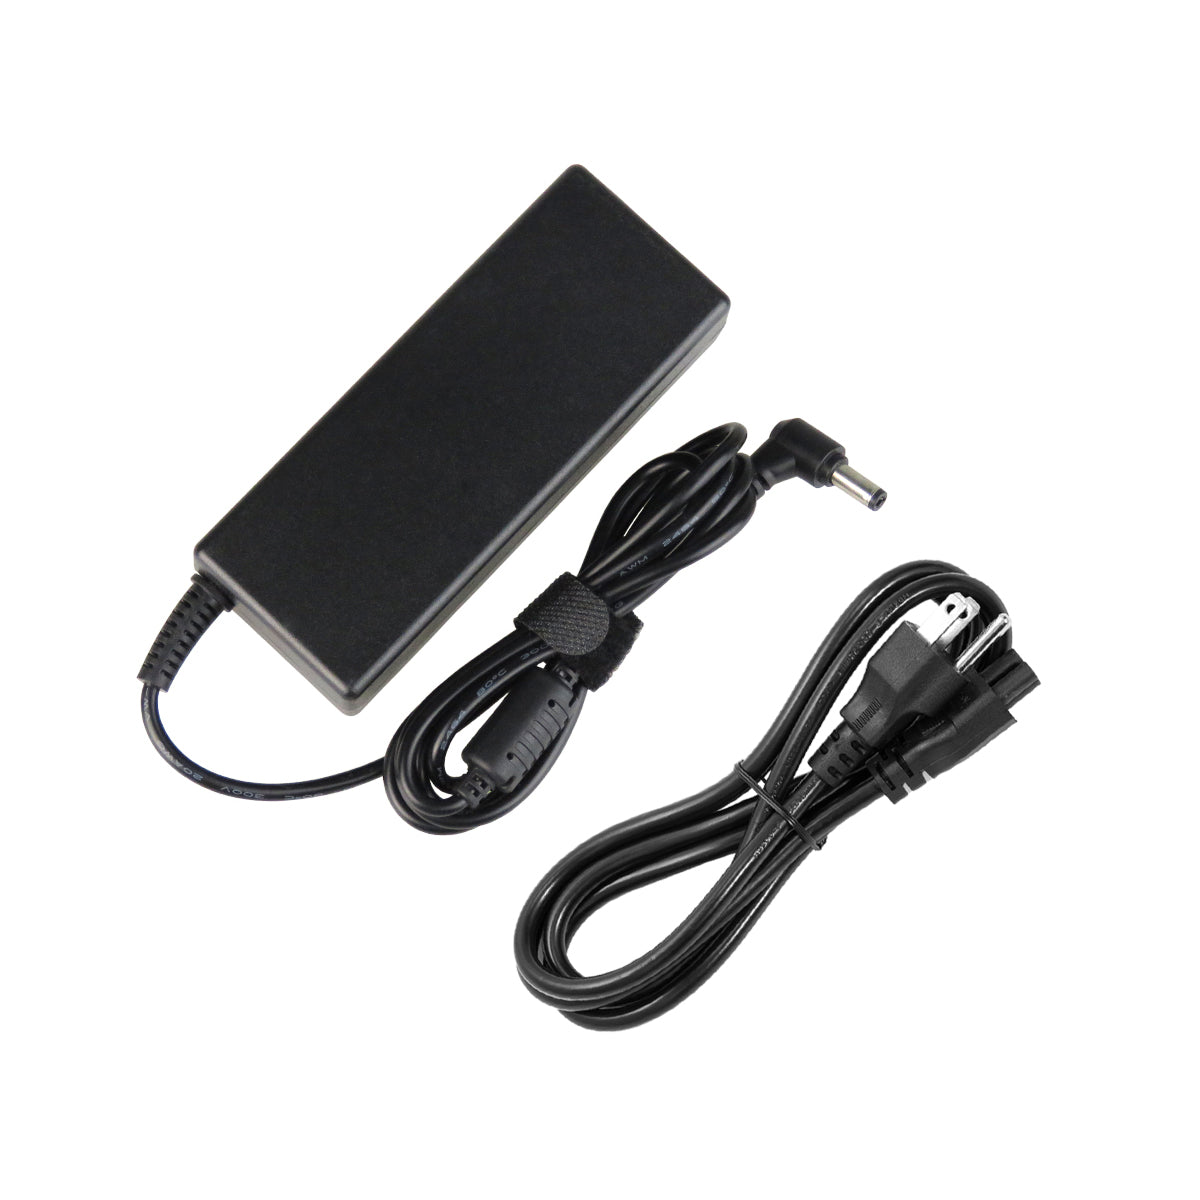 AC Adapter Charger for ASUS N76 Notebook.